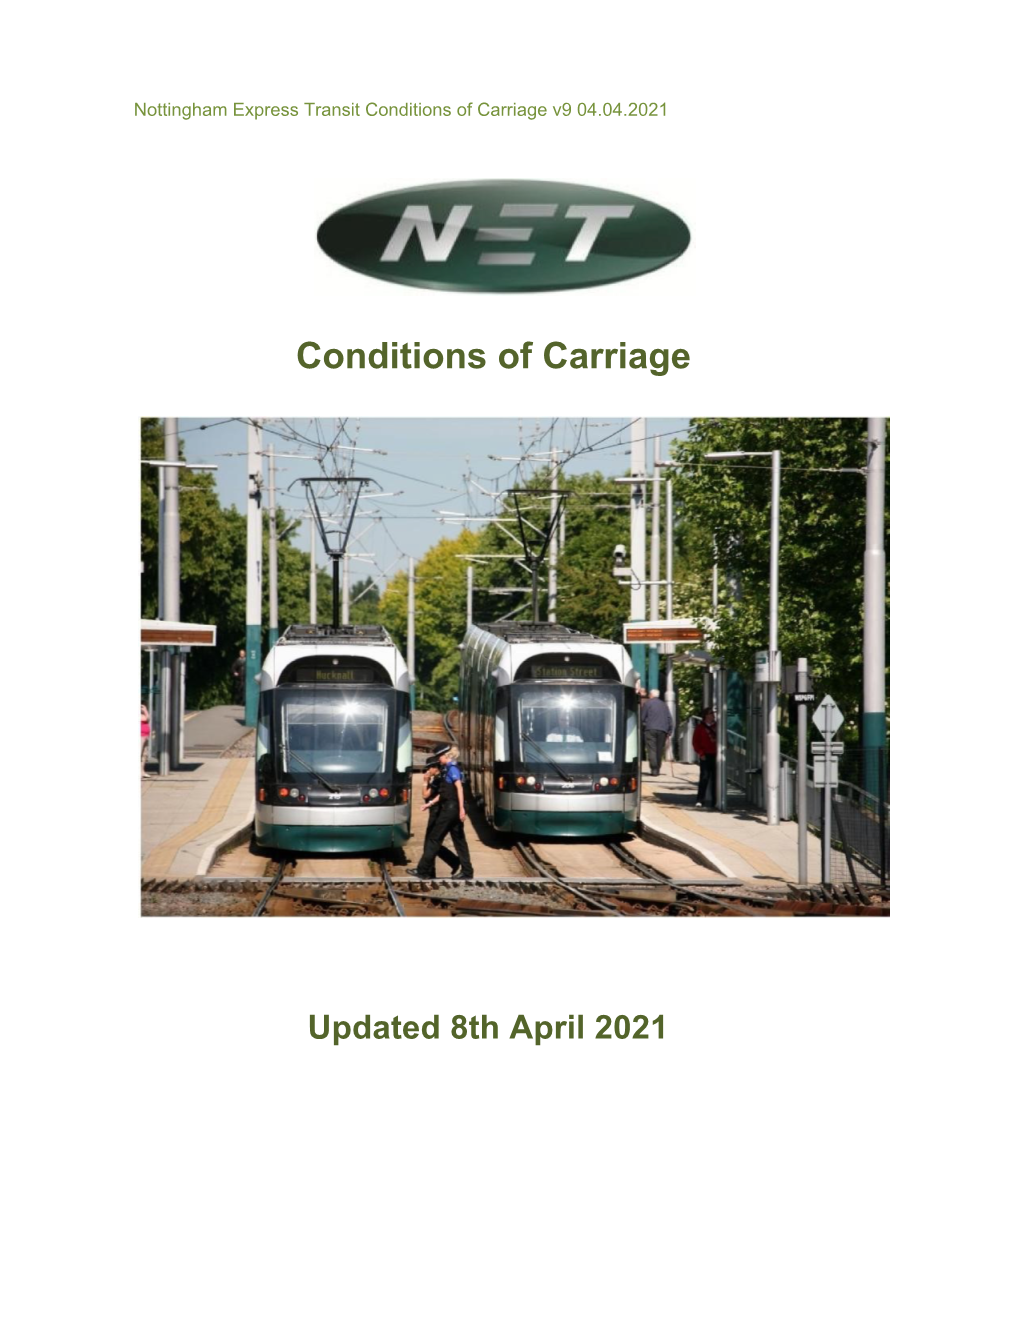 Conditions of Carriage V9 04.04.2021